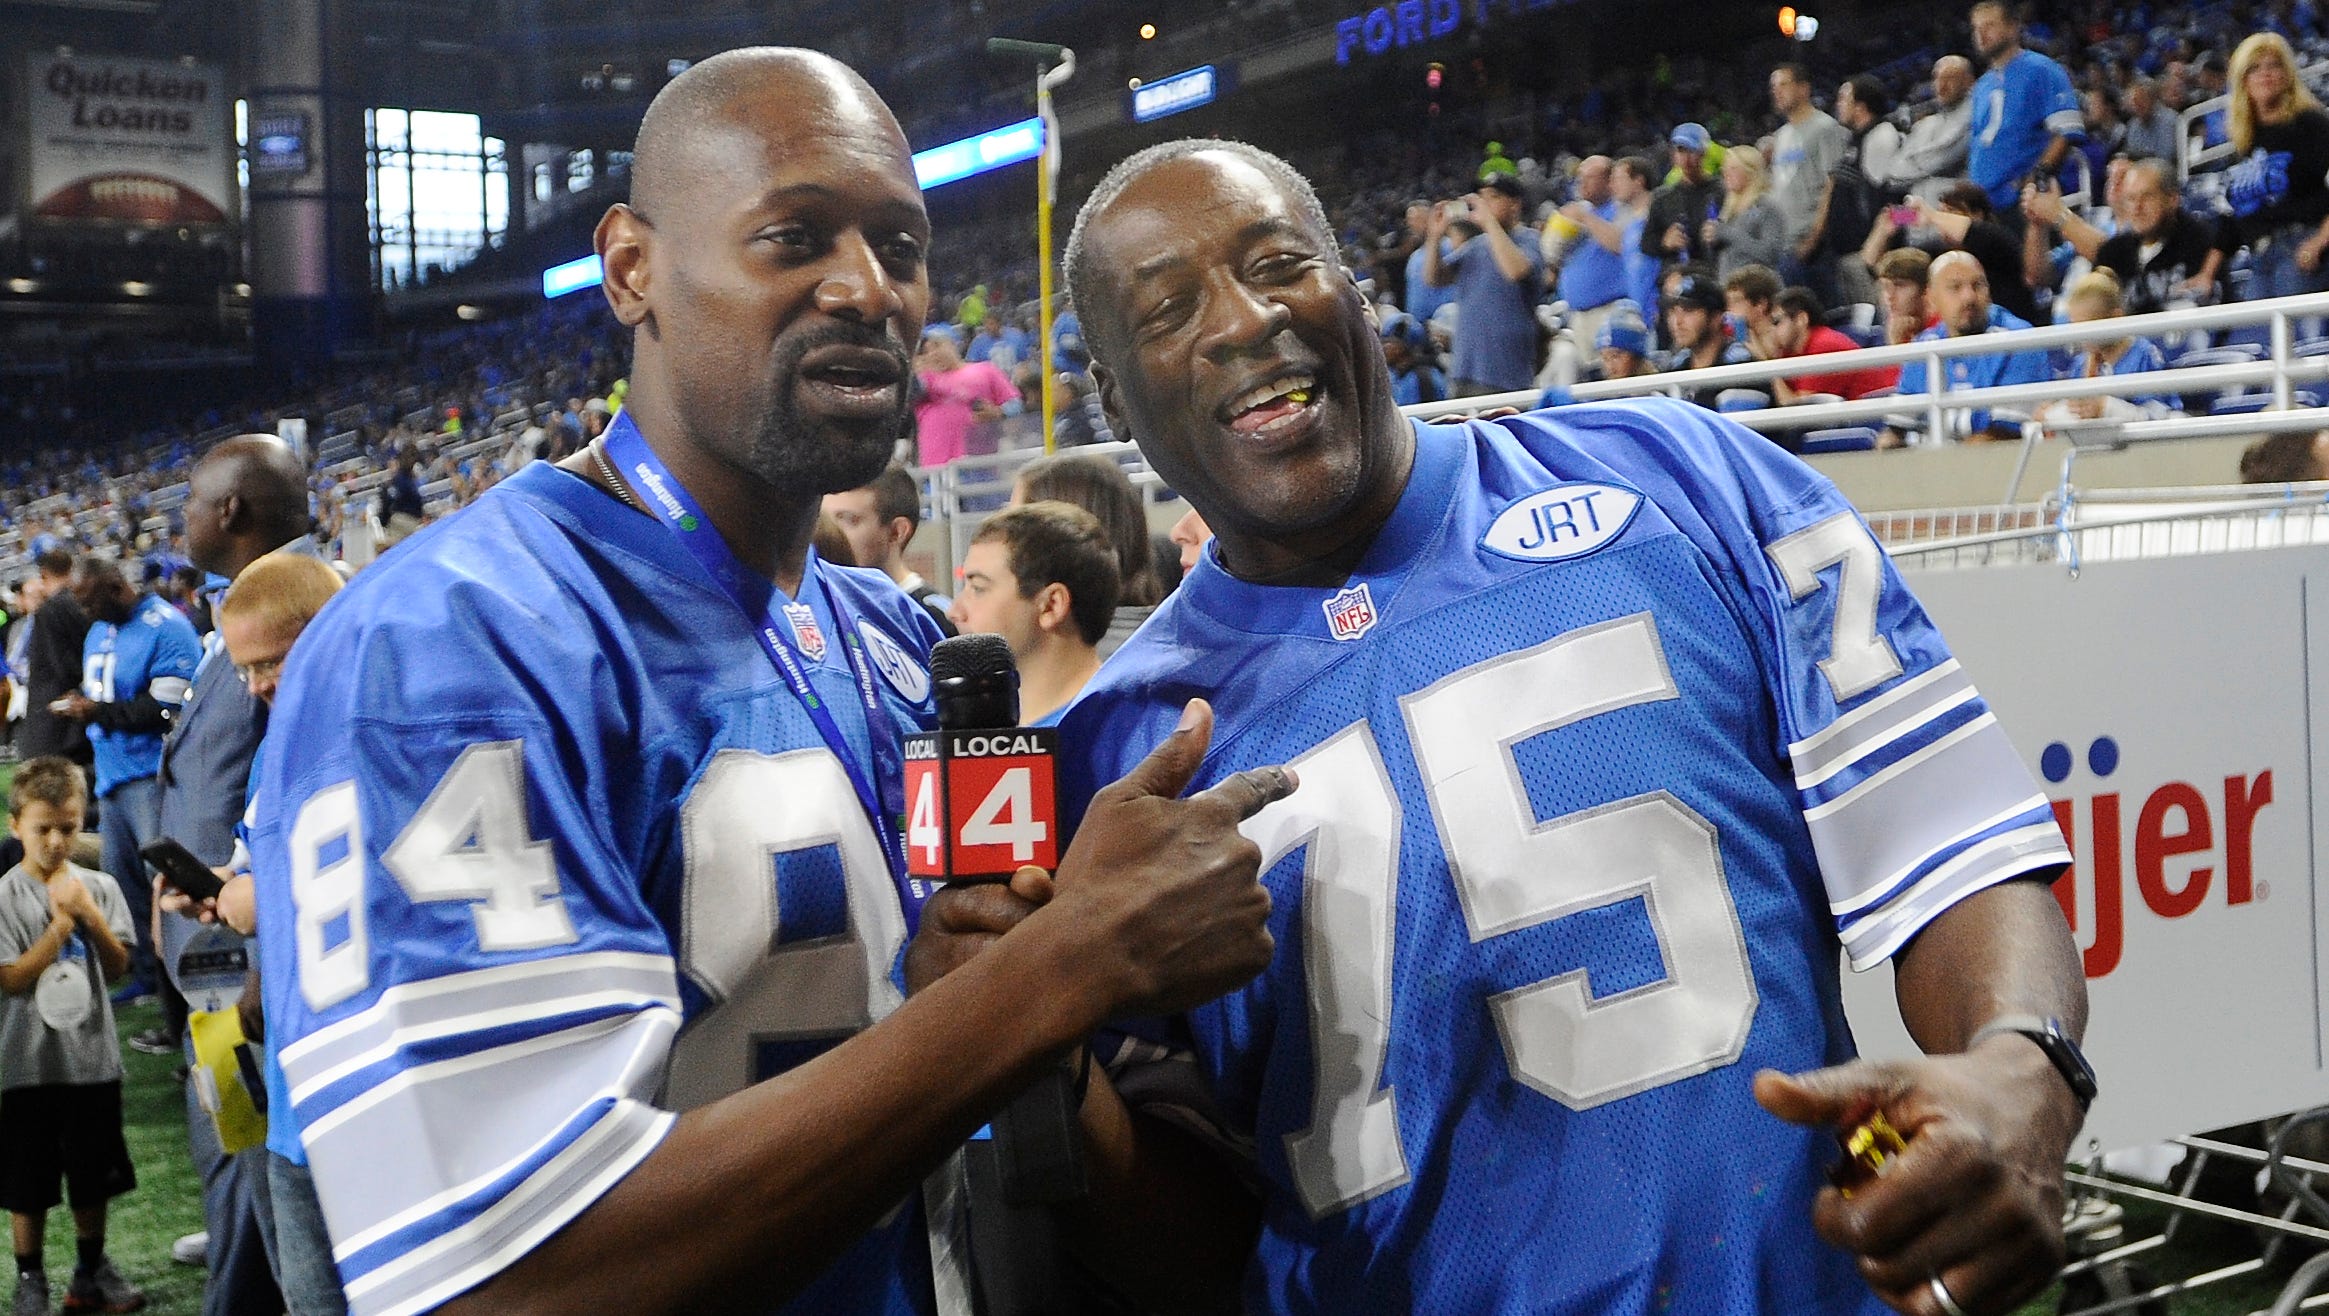 Members of the 1991 Detroit Lions Herman Moore and Lomas Brown work the sidelines before the Lions take on the Los Angeles Rams at Ford Field in Detroit on October 16, 2016.